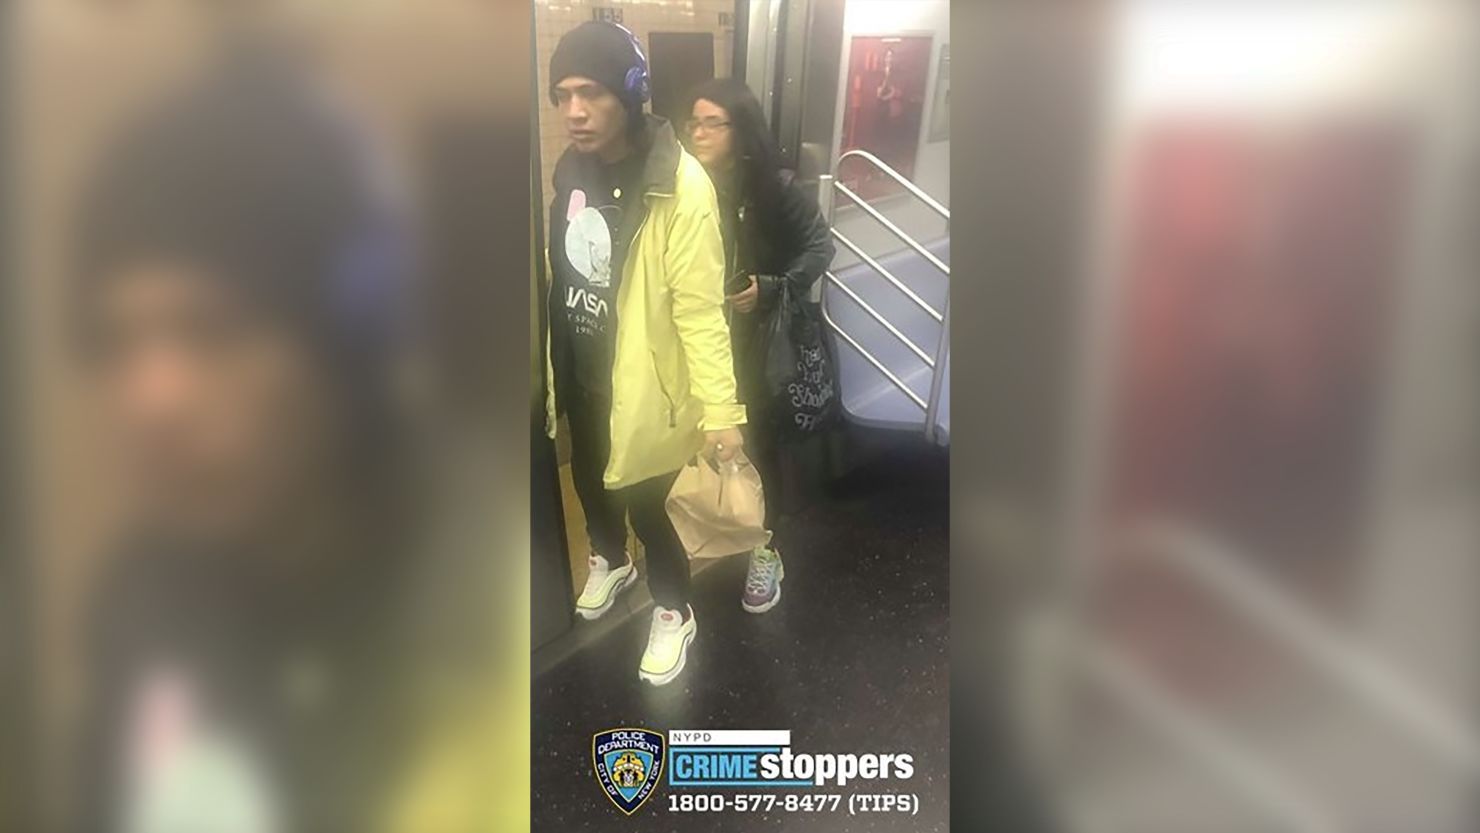 New York police issued this photo of a man and a woman wanted in connection with an attack on a transgender woman at a subway station last week.